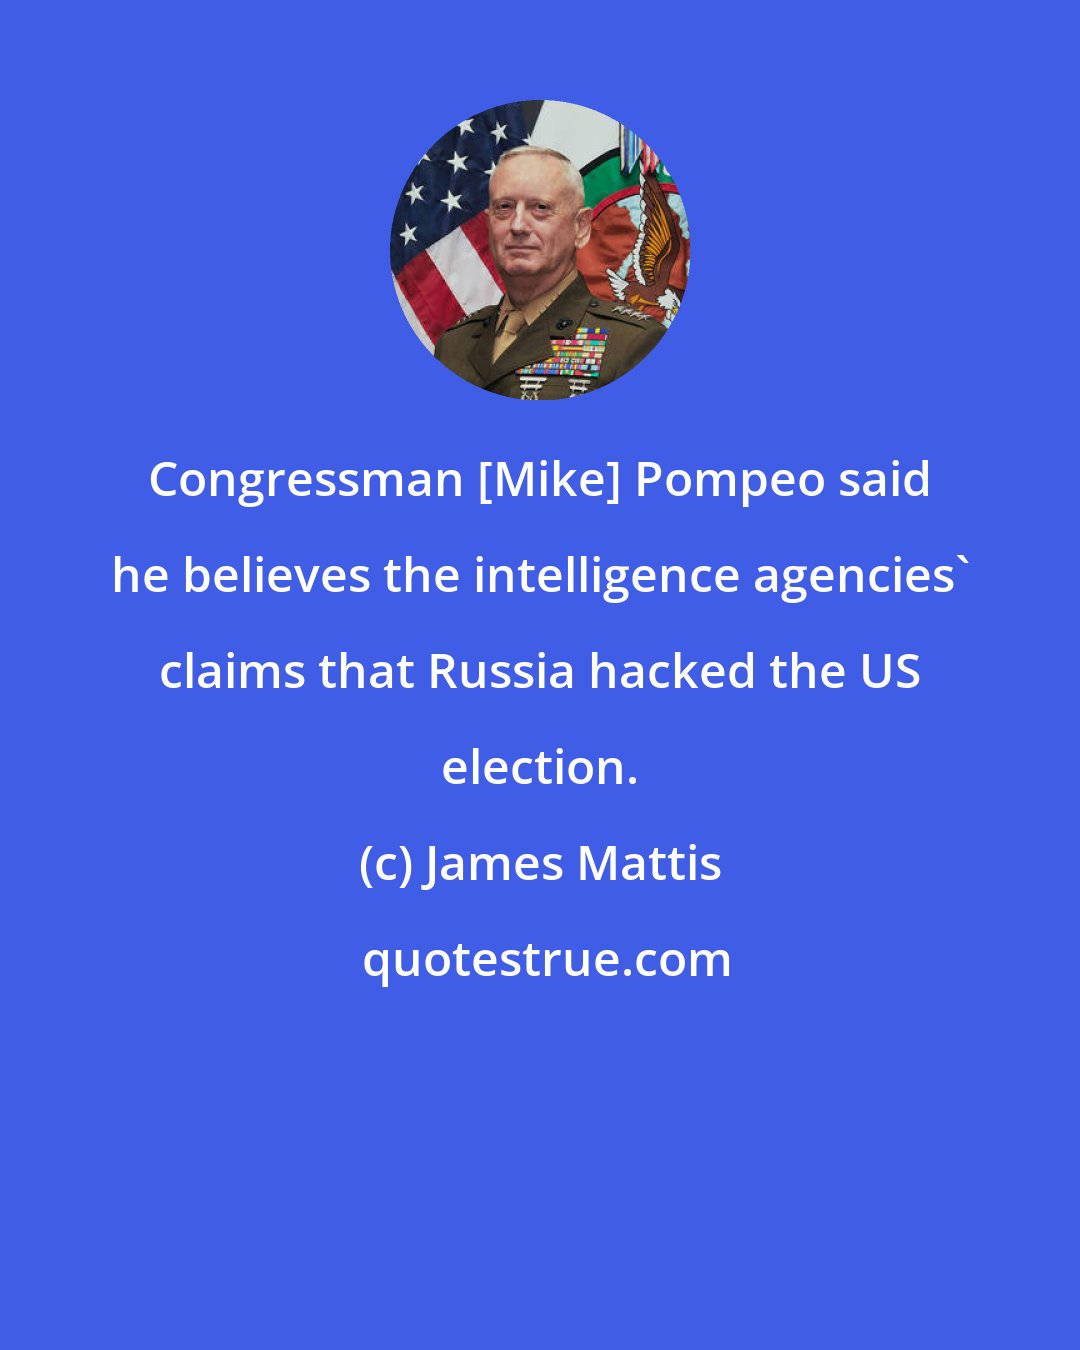 James Mattis: Congressman [Mike] Pompeo said he believes the intelligence agencies' claims that Russia hacked the US election.